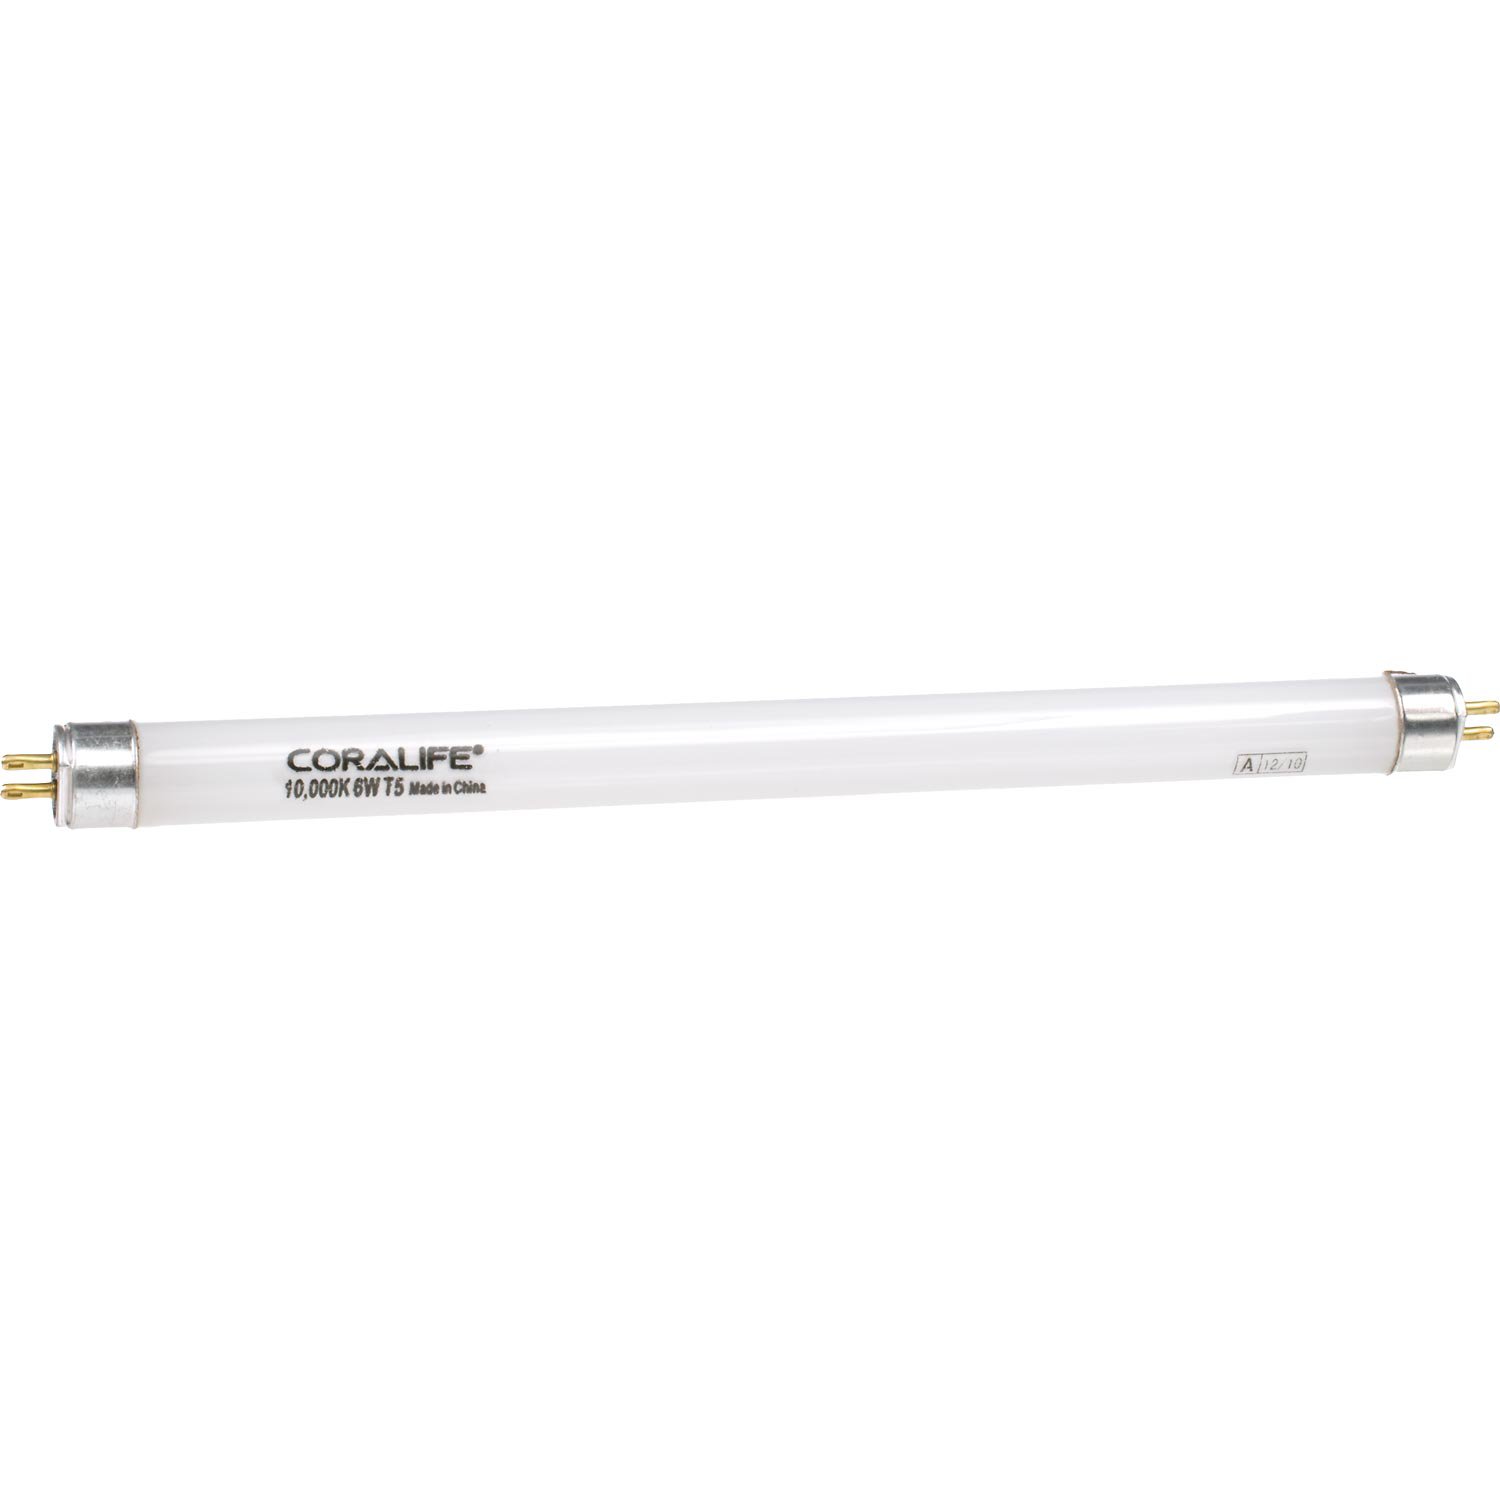 Coralife 6700K Daylight T5 High Output Fluorescent Lamp for freshwater aquariums 